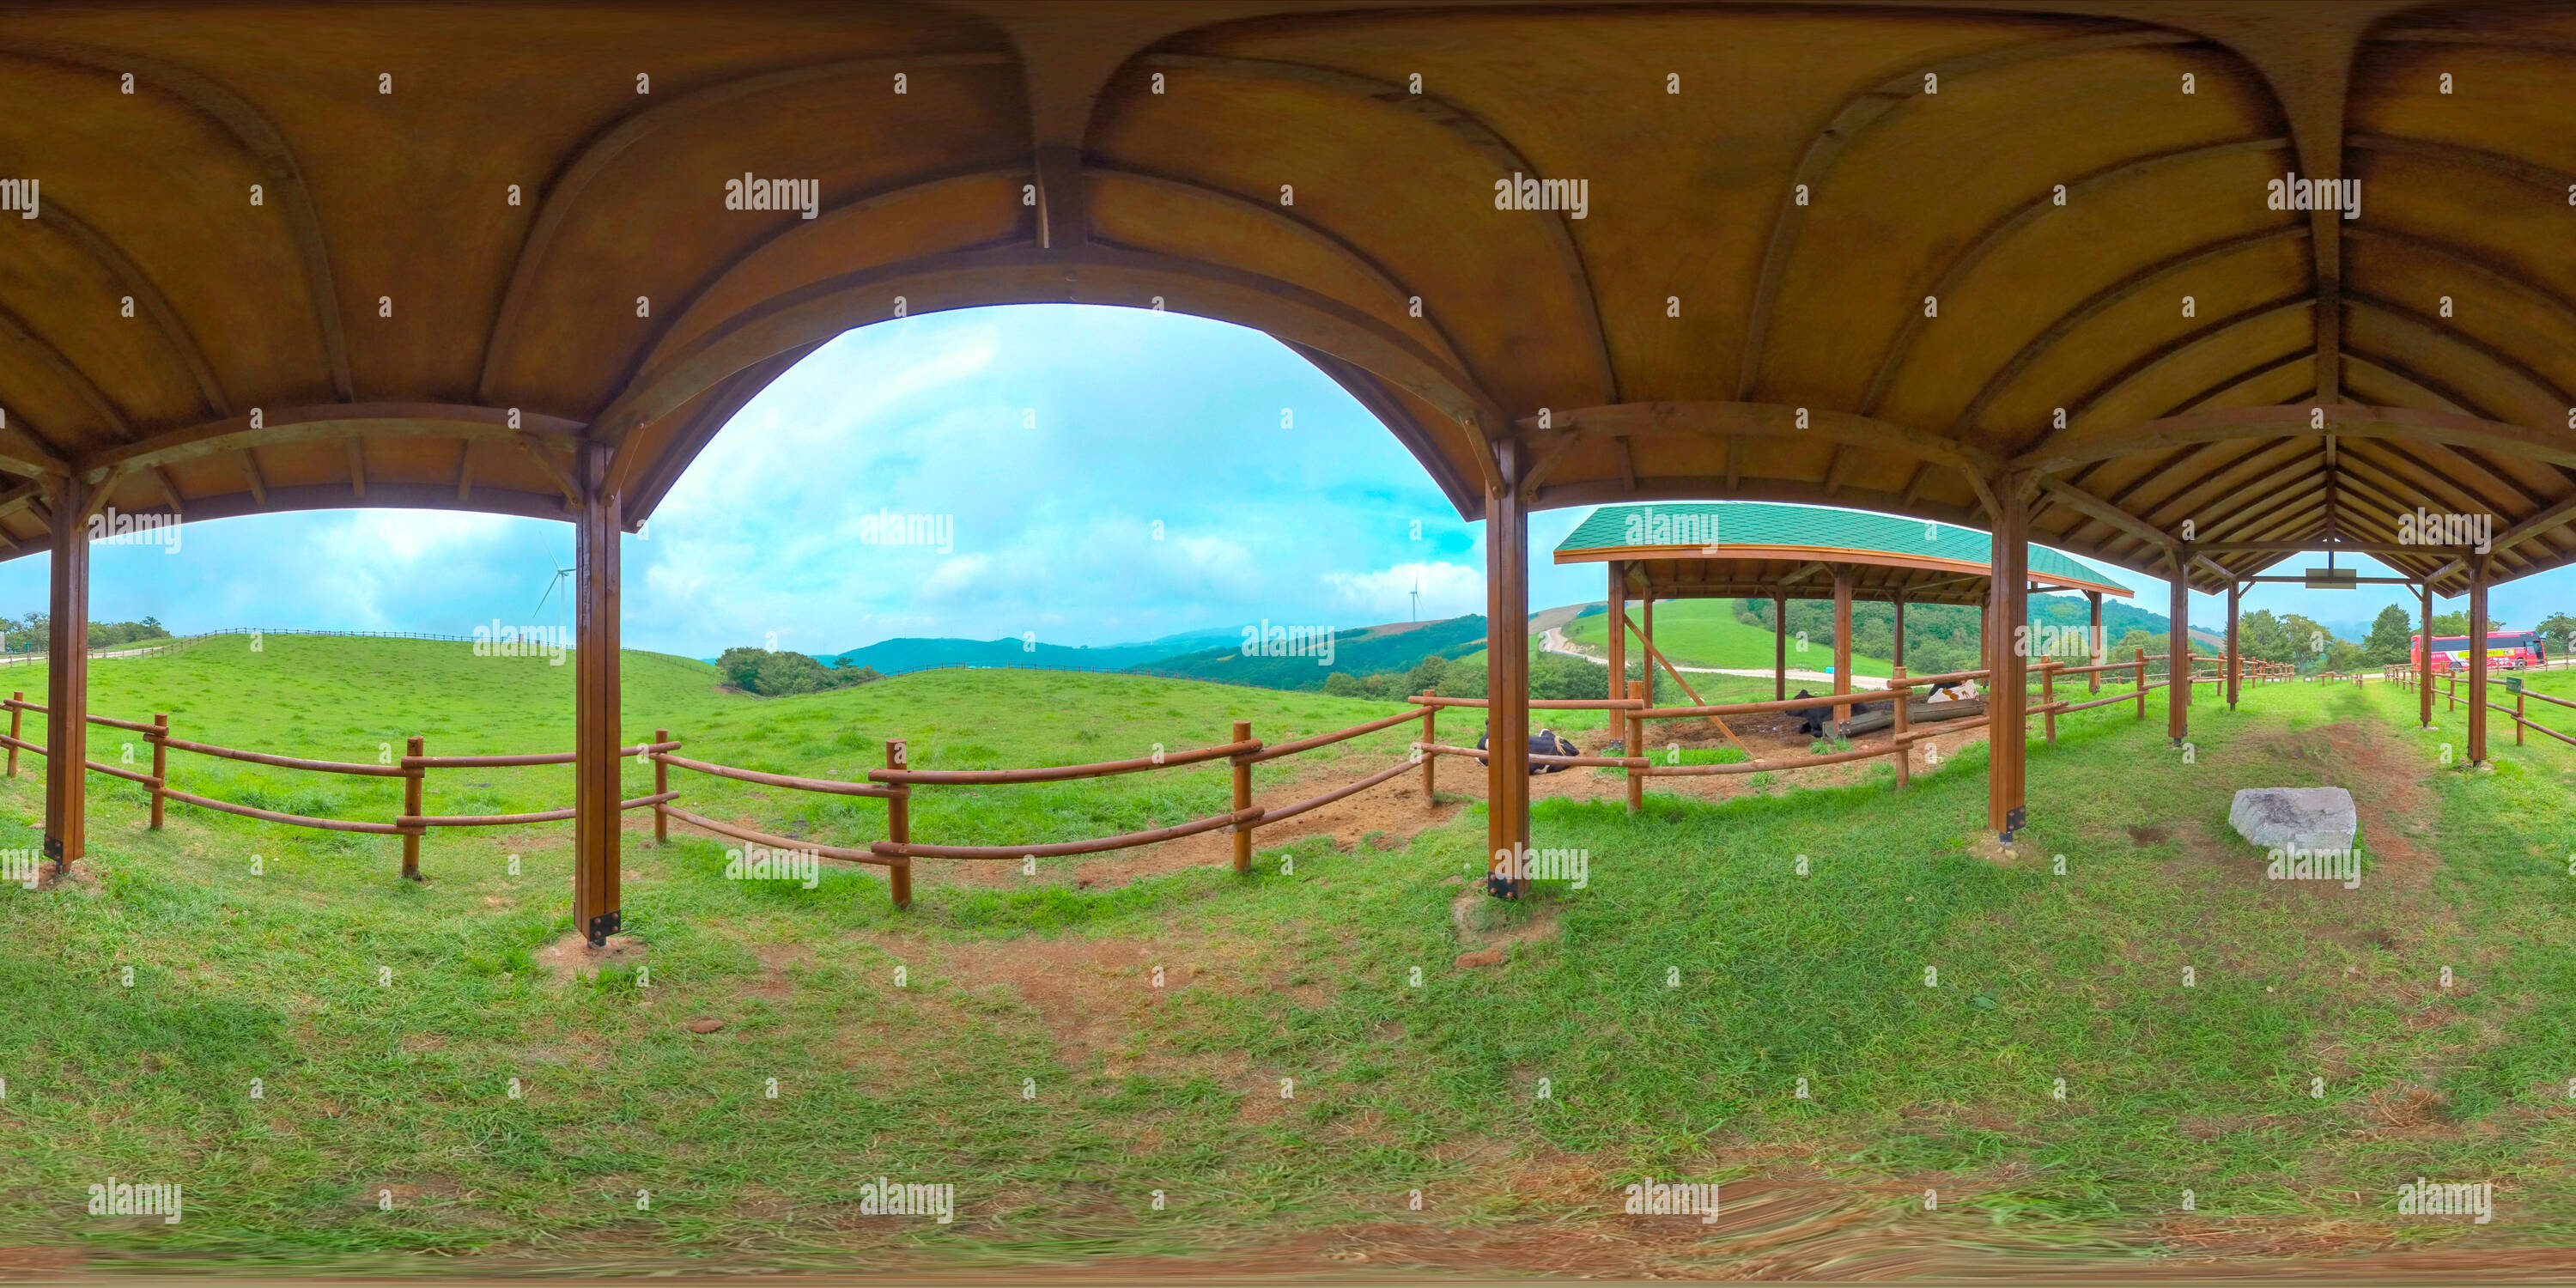 360 degree panoramic view of Daegwanryeong, South Korea 6 August 2019: 360 degrees spherical panorama of Samyang Ranch where is famous sheep farm ranch.